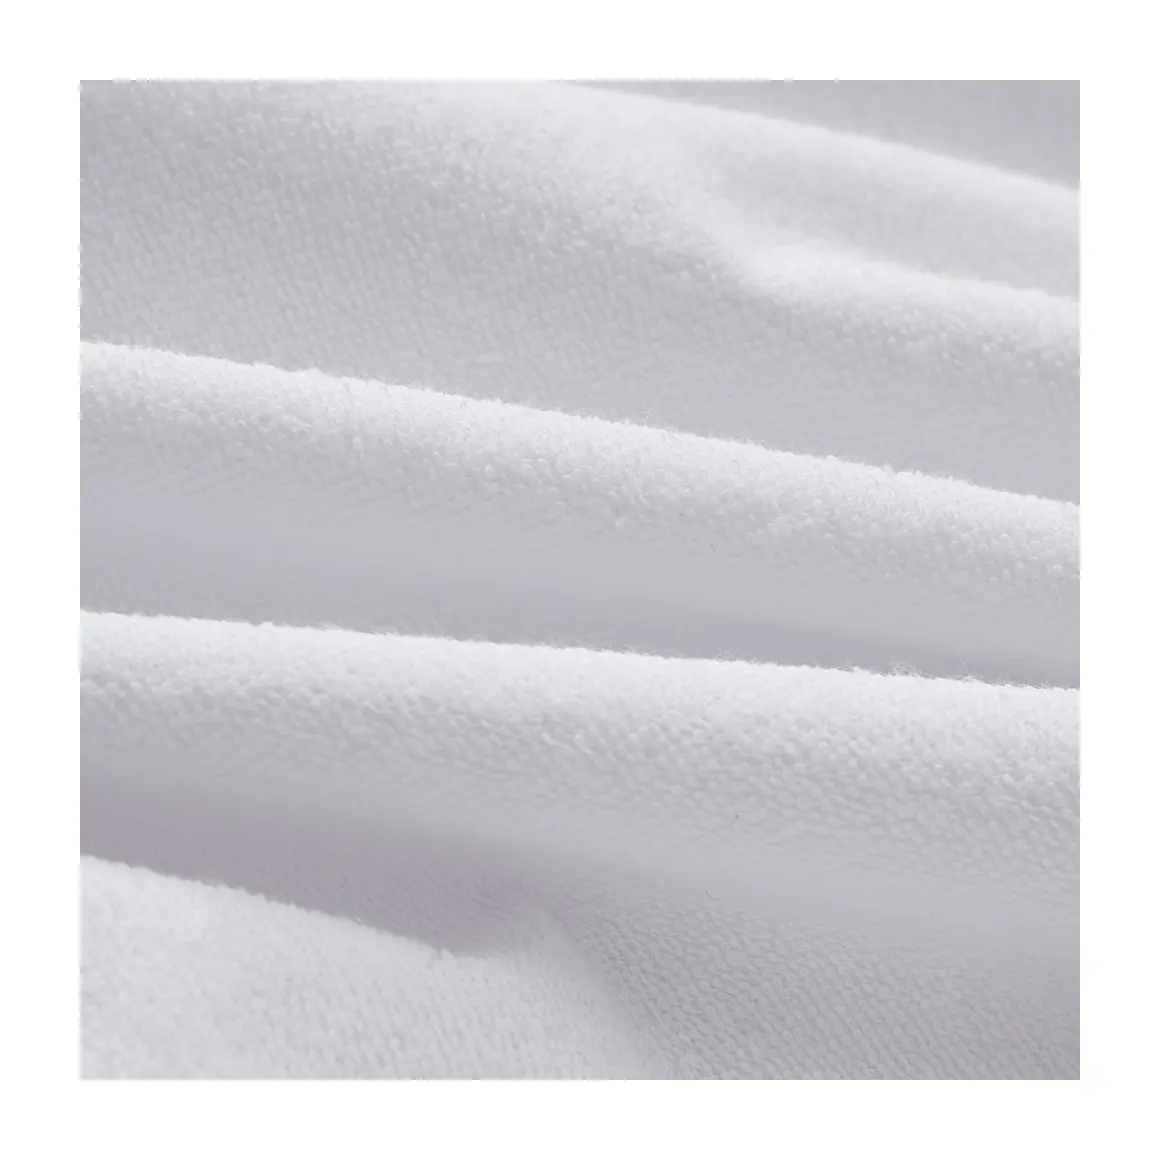 Waterproof Fabric Polyester Terry Fabric TPU Backing Terry Brush Fabric for Home Textiles Products